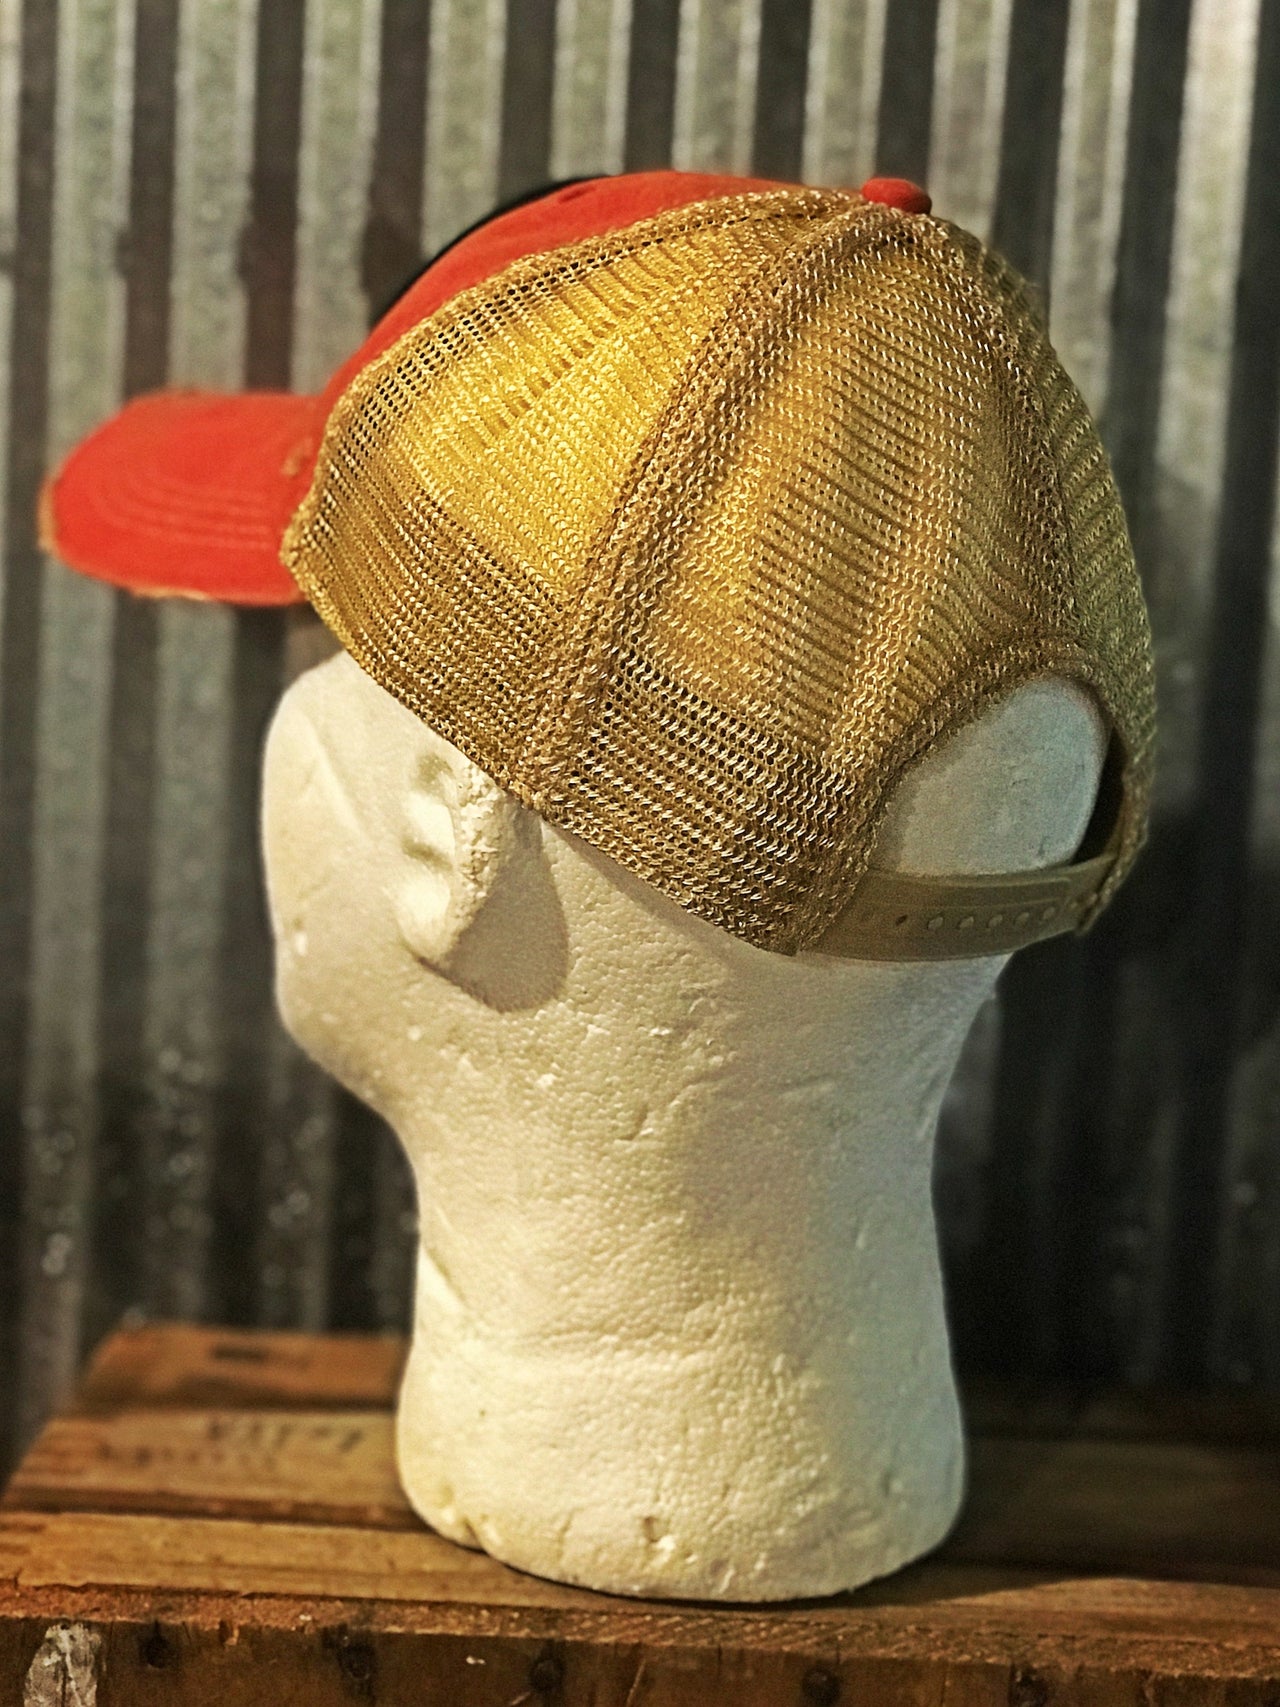 Mohawk Gasoline Patch Hat- Distressed Red Snapback